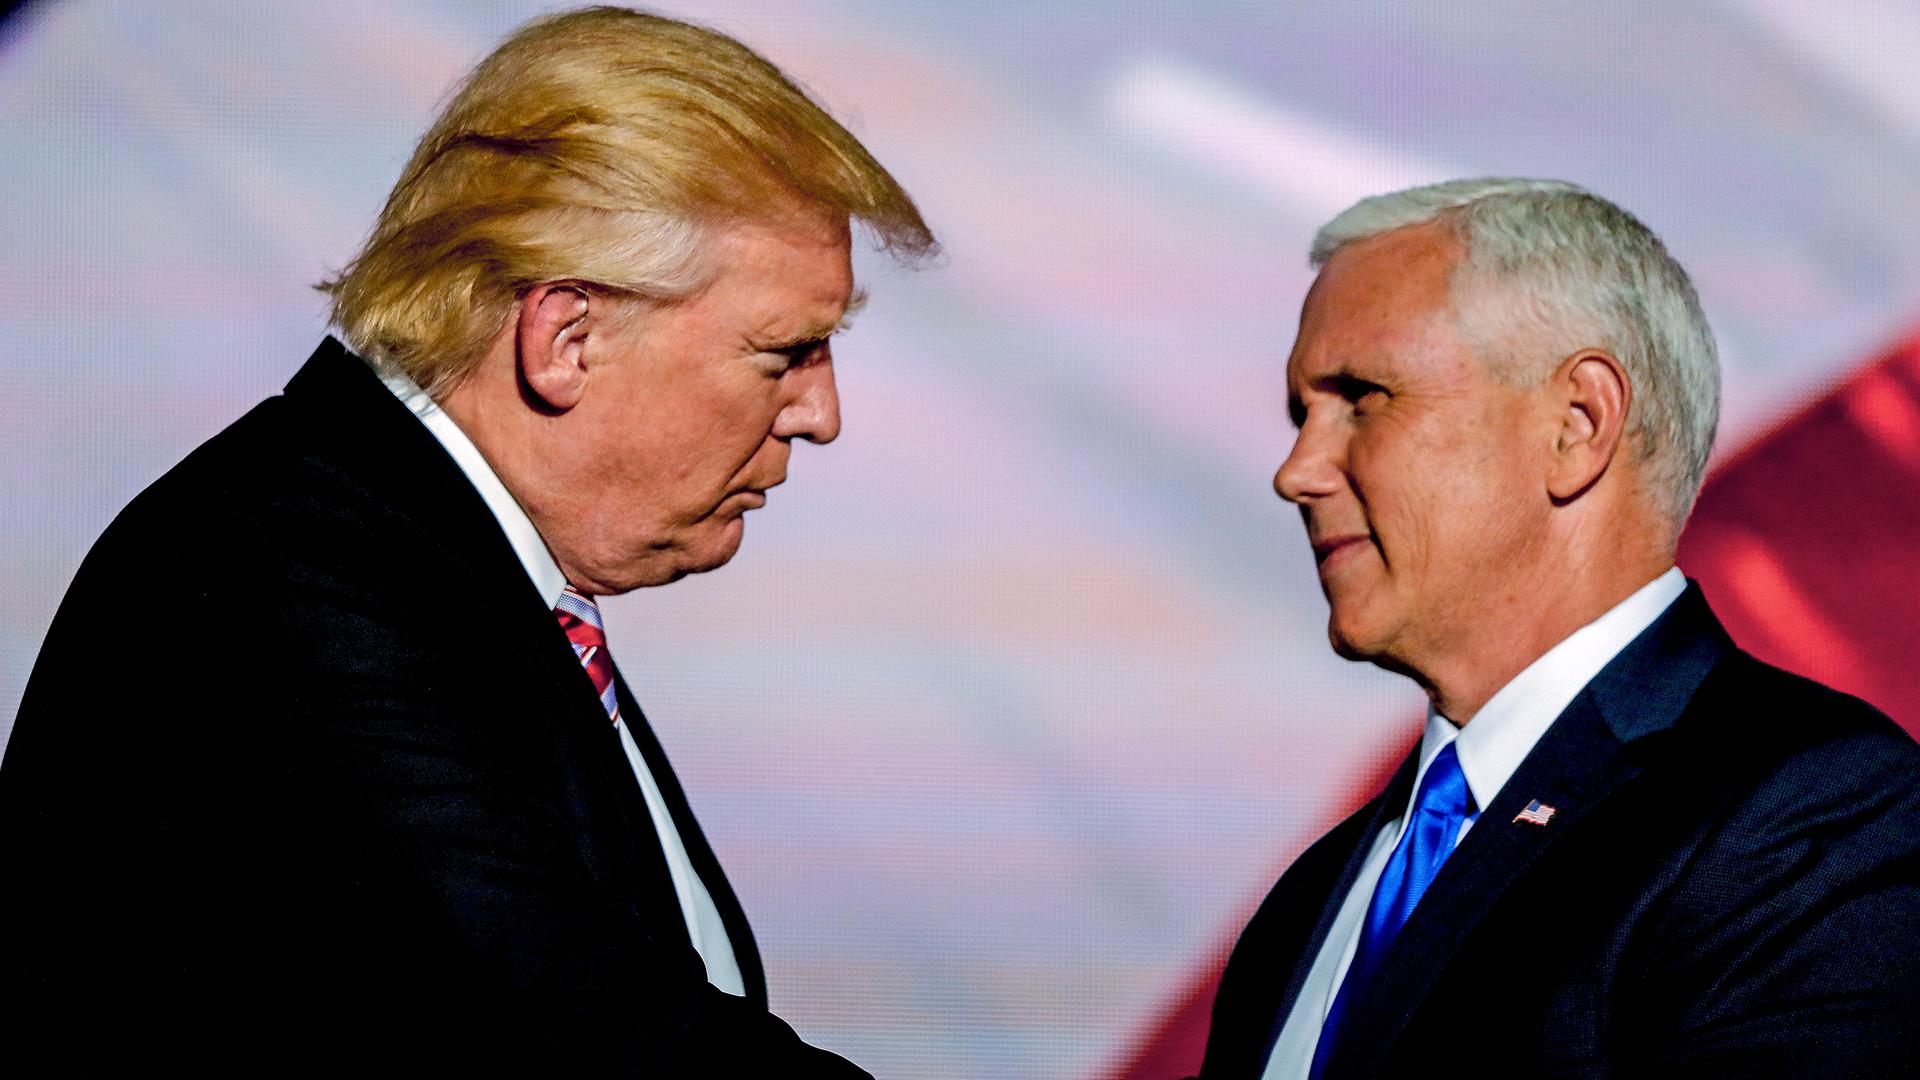 Pence, right, will be up against his former boss Donald Trump, left, in a crowded Republican field